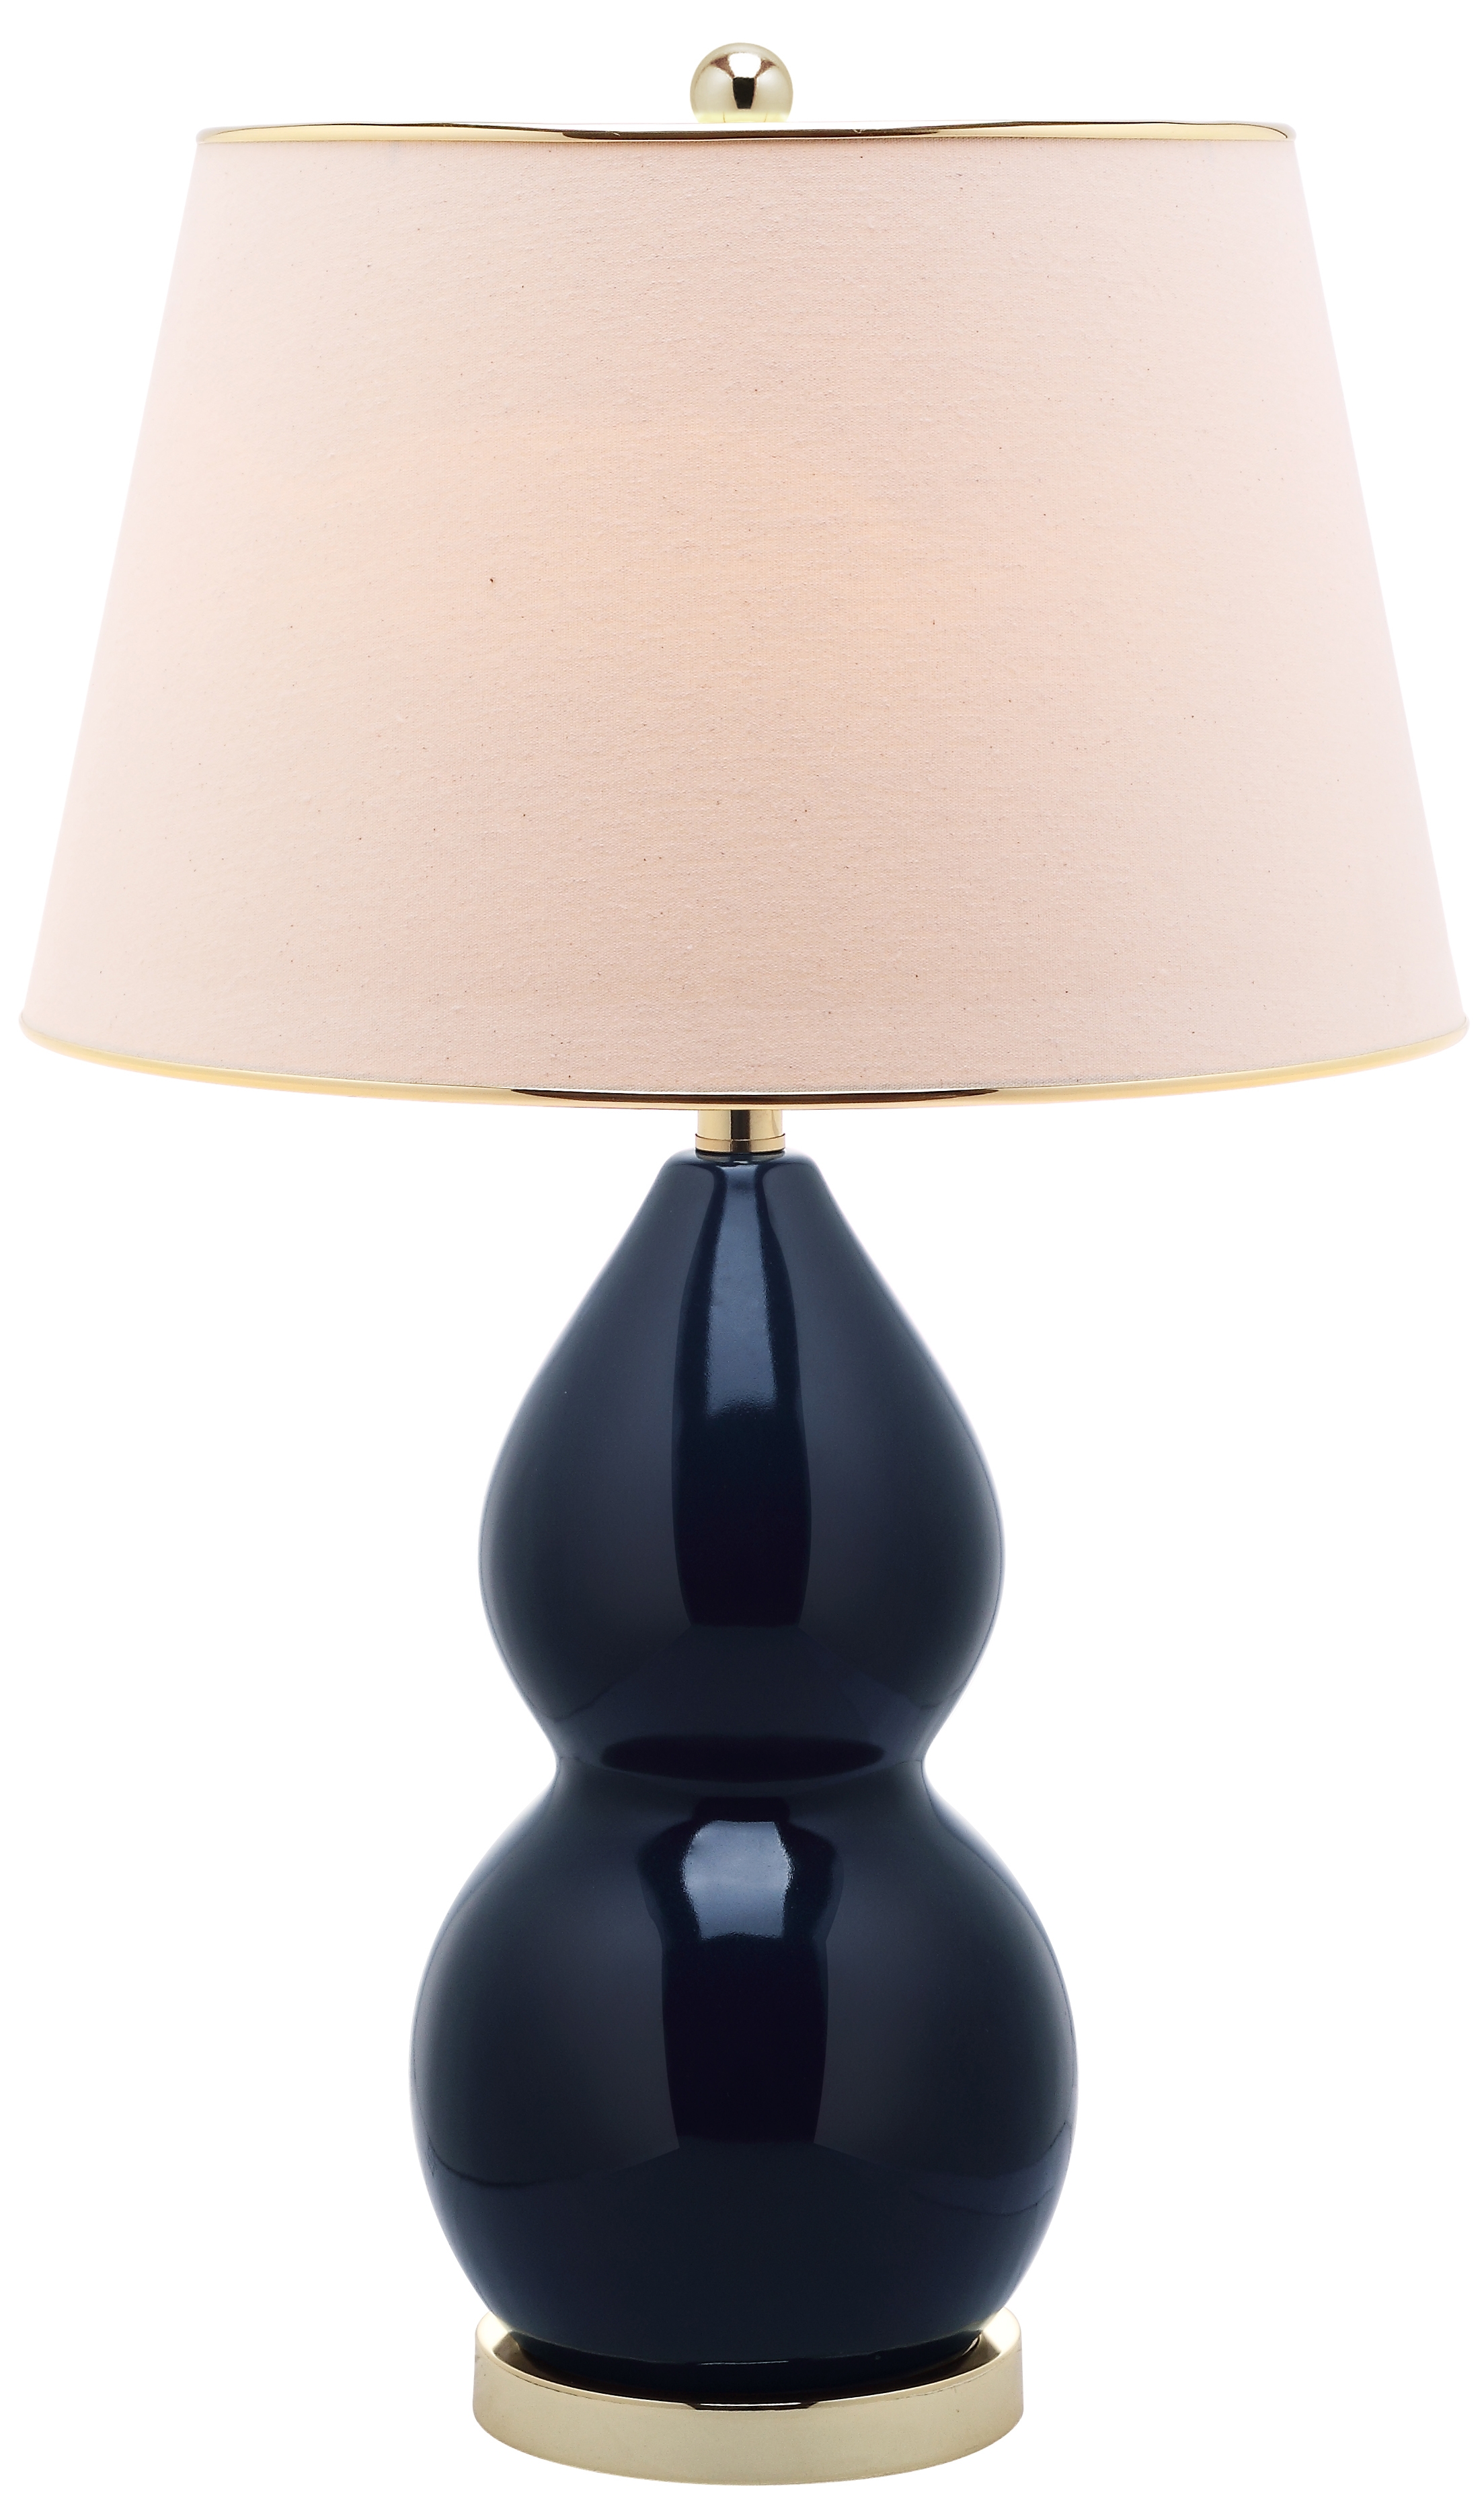 Jill 26.5-Inch H Double- Gourd Ceramic Table Lamp - Navy - Arlo Home - Image 4